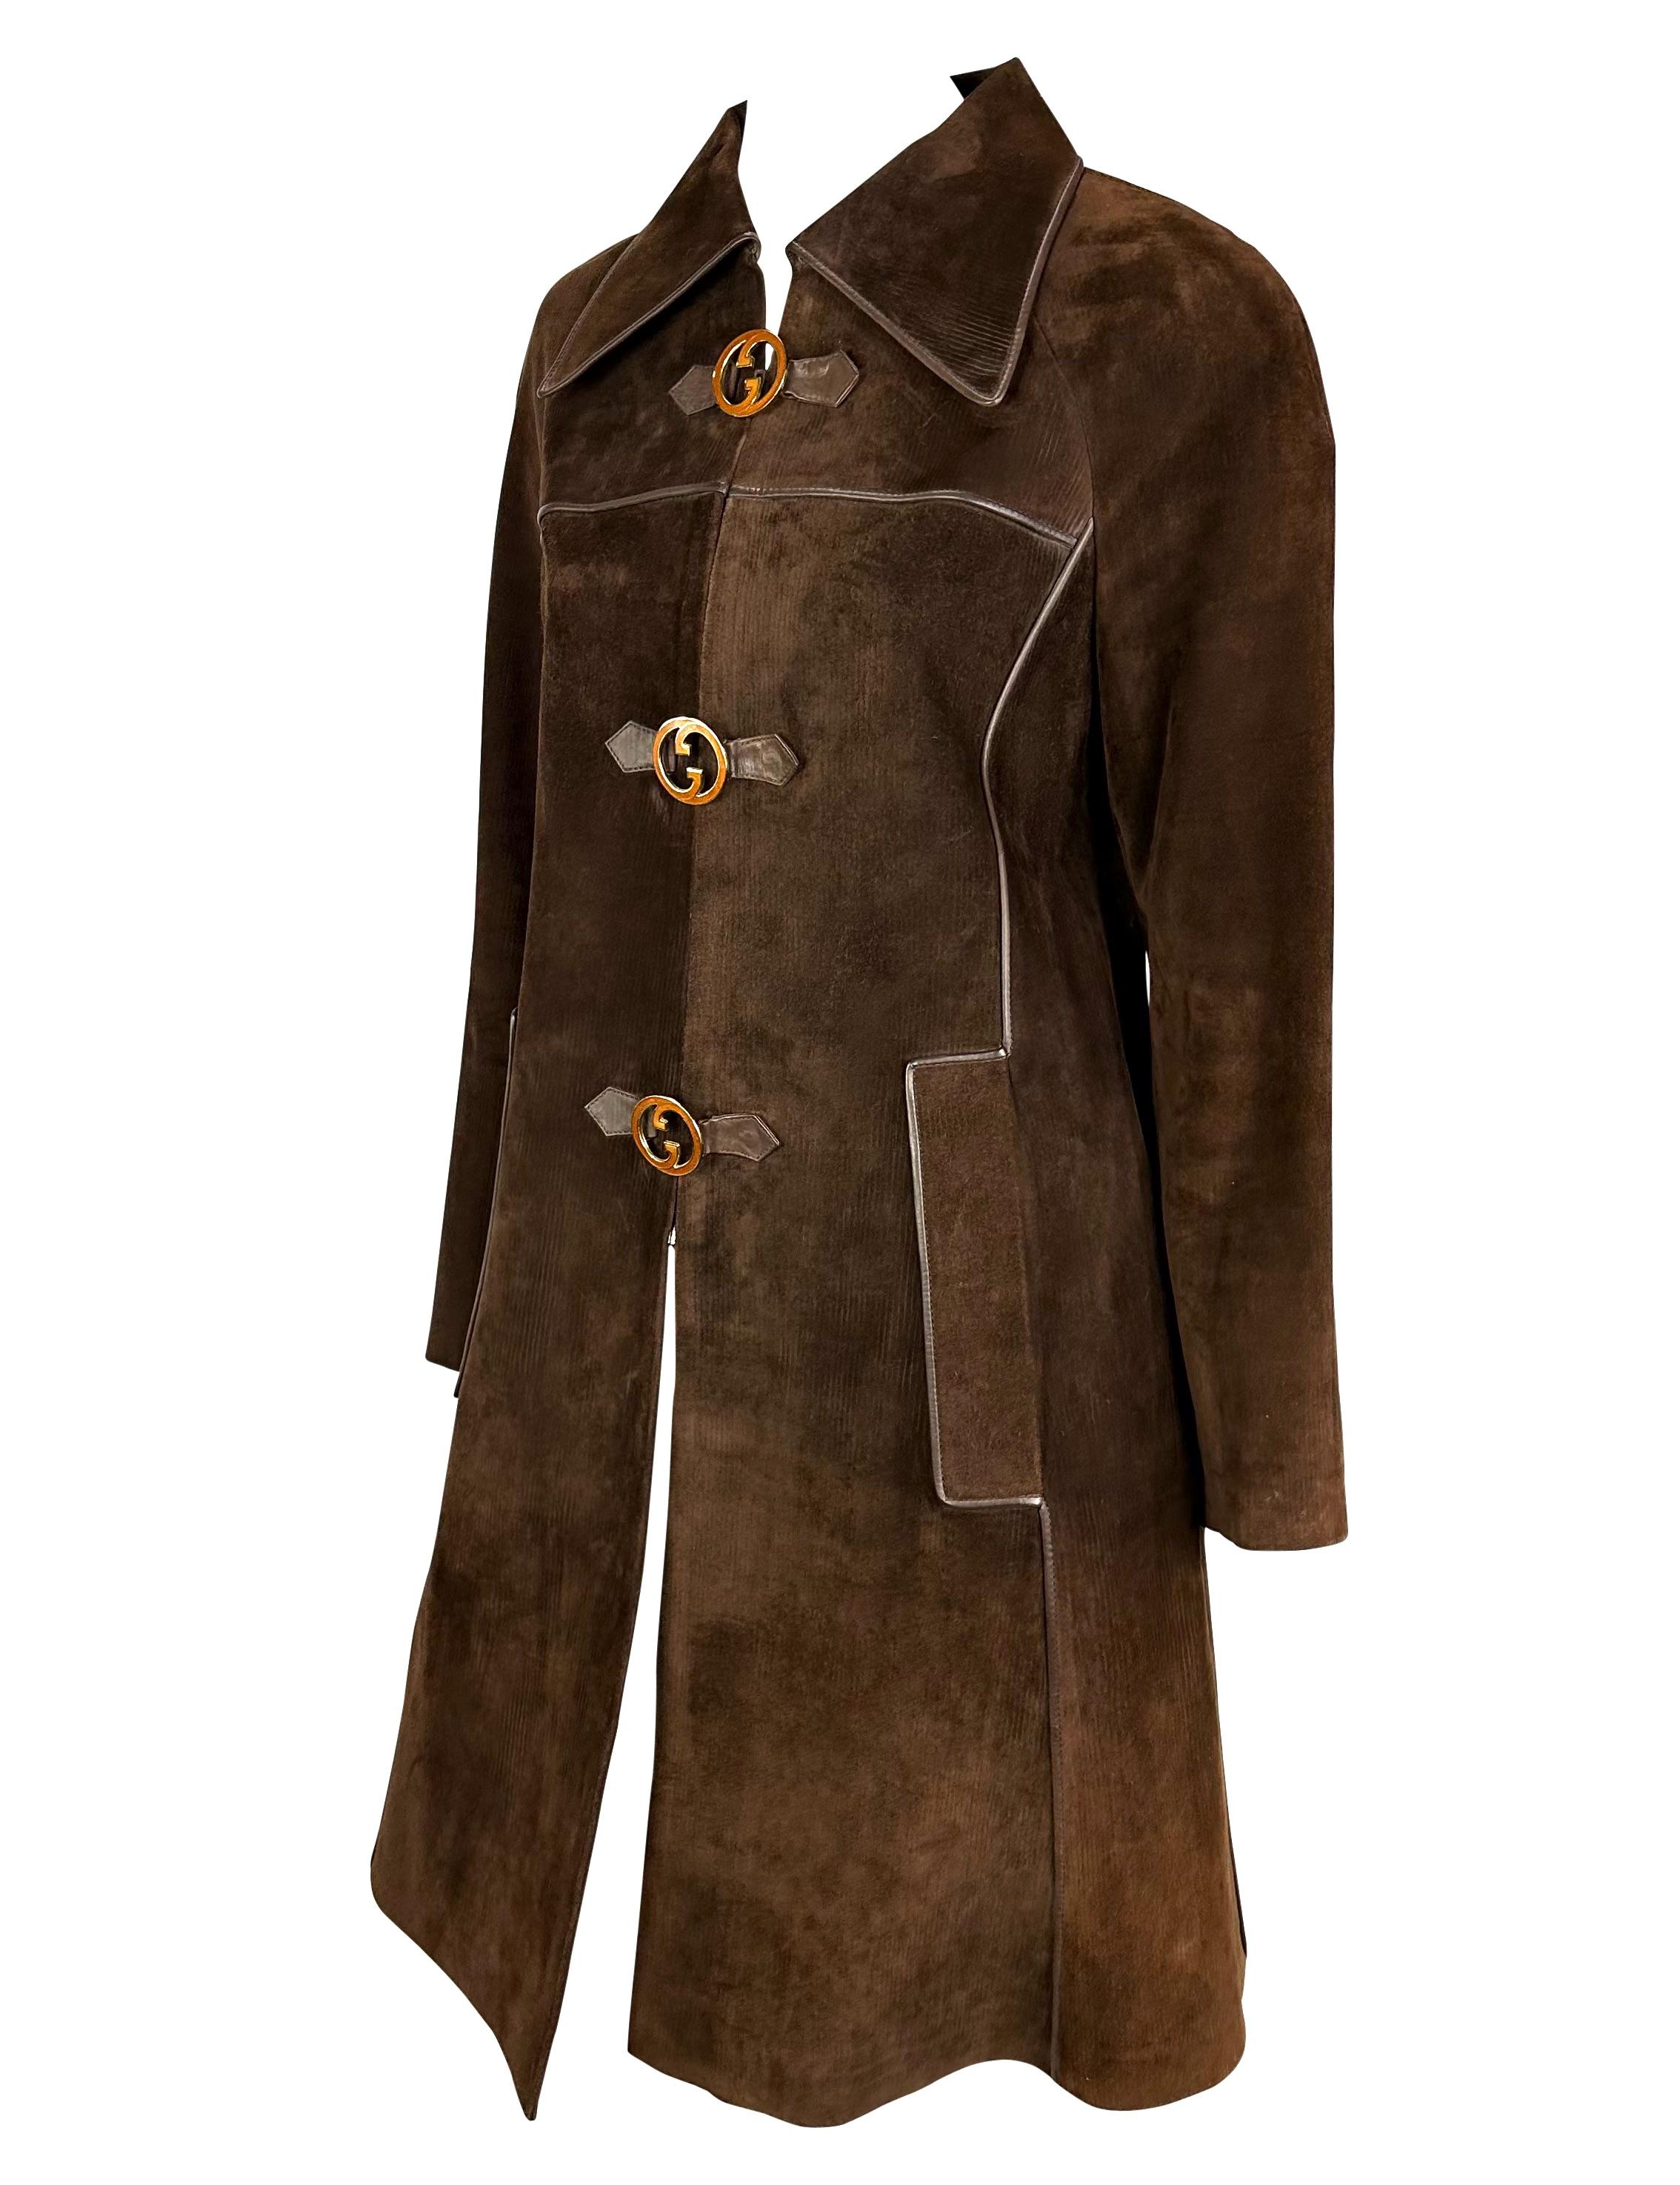 Presenting an incredible brown suede striped Gucci trench coat. From the 1970s, this ultra-rare coat is constructed entirely of patterned brown suede. The coat features leather piping and an oversized collar, and it is completed with large orange